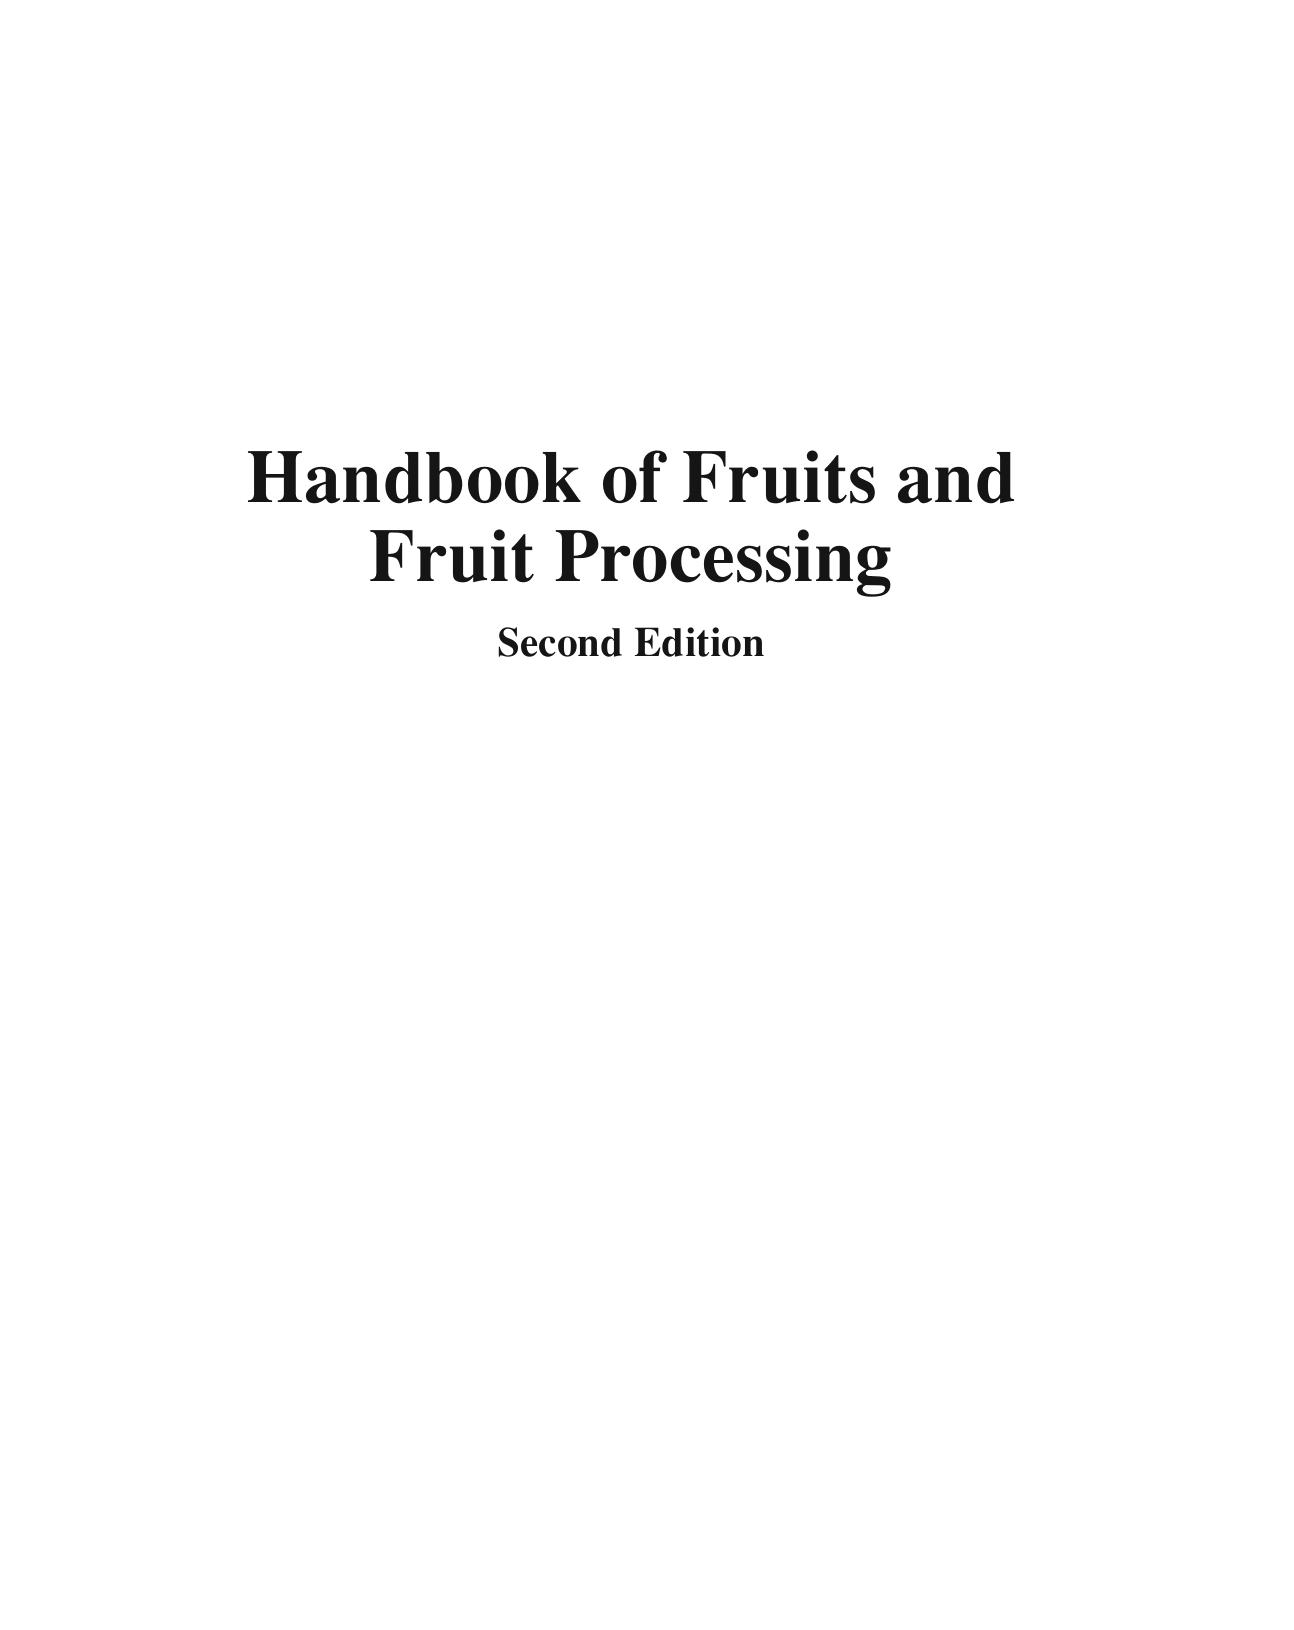 Handbook of Fruits and Fruit Processing, Second Edition 2012